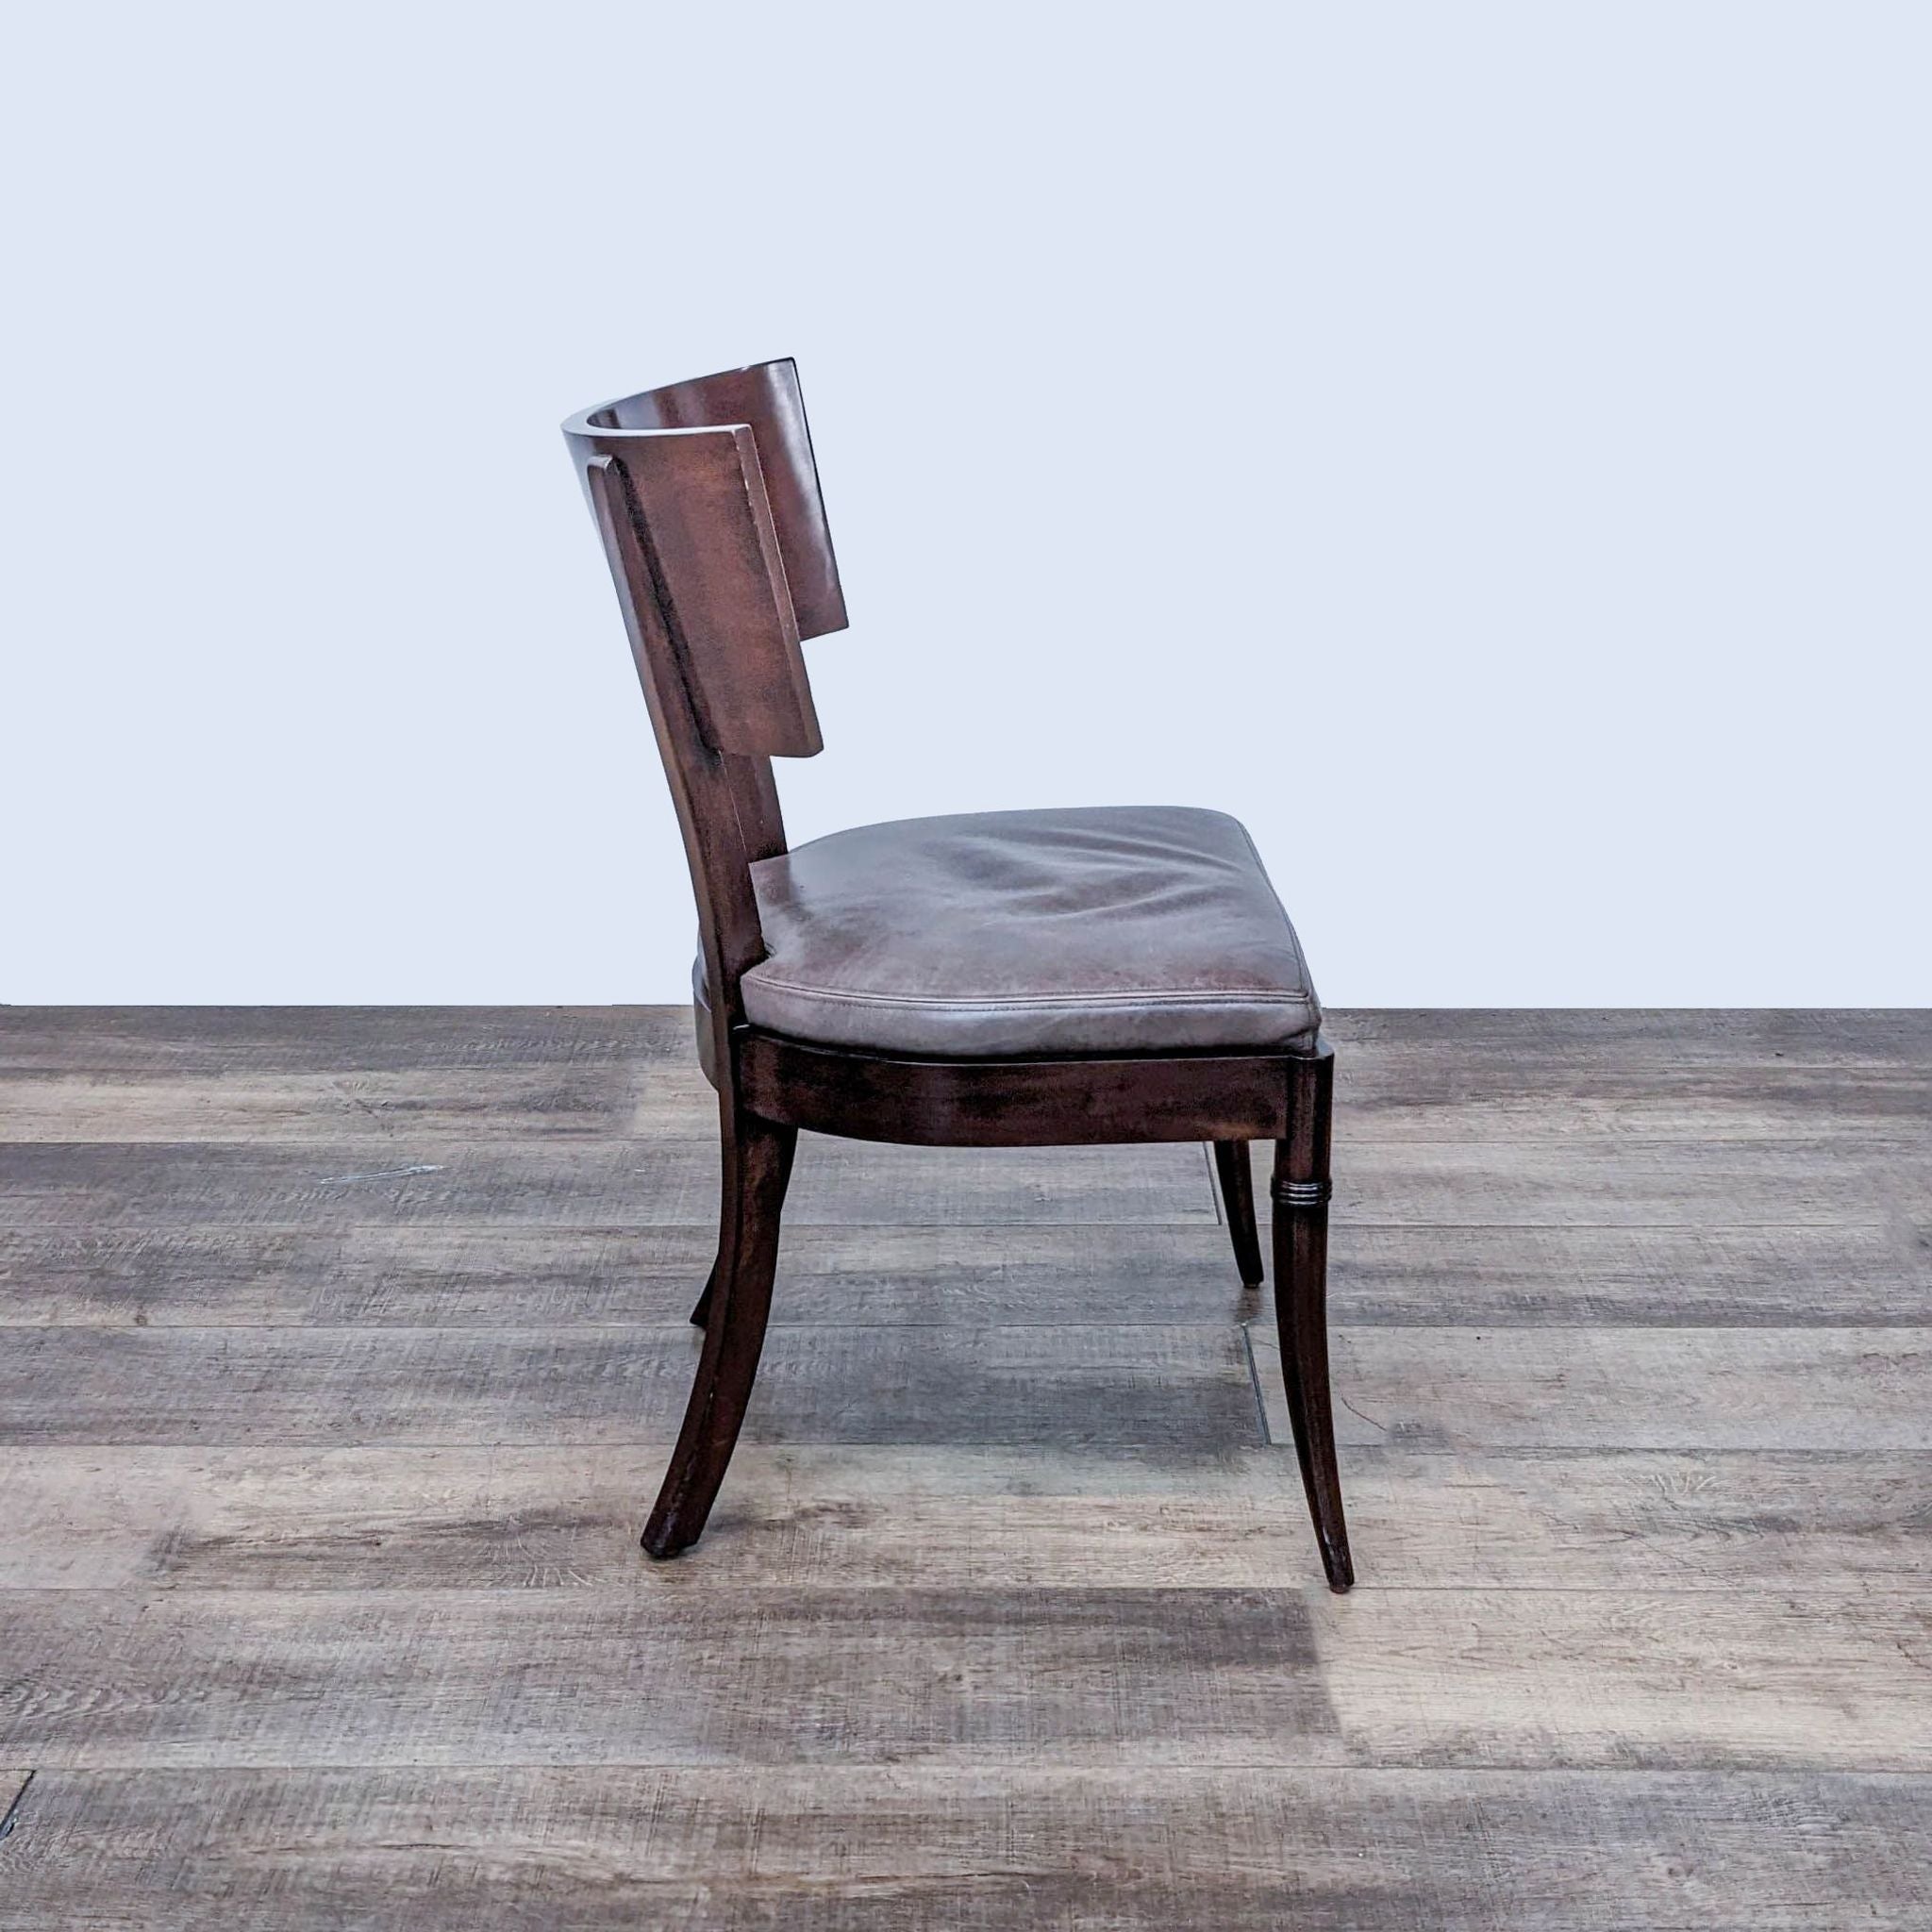 Wooden dining chair from Williams Sonoma Home, featuring a scoop back and leather upholstery.